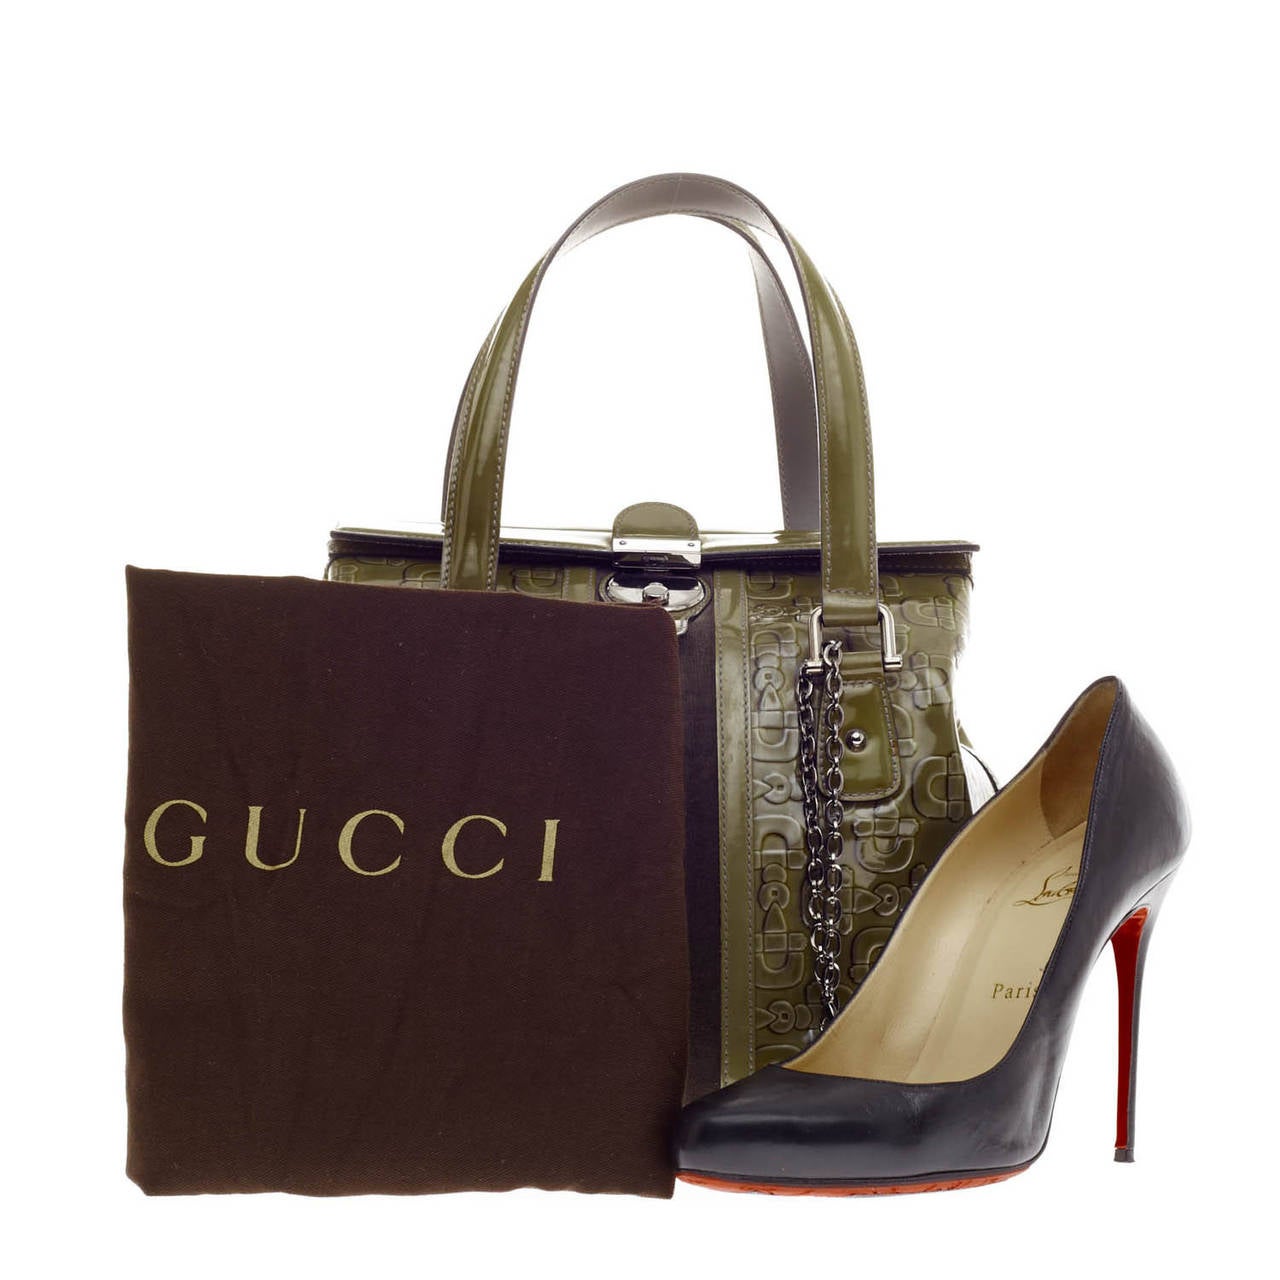 This authentic Gucci Treasure Boston Patent Small in rich olive is a stylish bag crafted with shiny patent leather with tonal velvet inlays coming down the middle. This unique satchel is accented with polished silver-tone hardware and decorated with